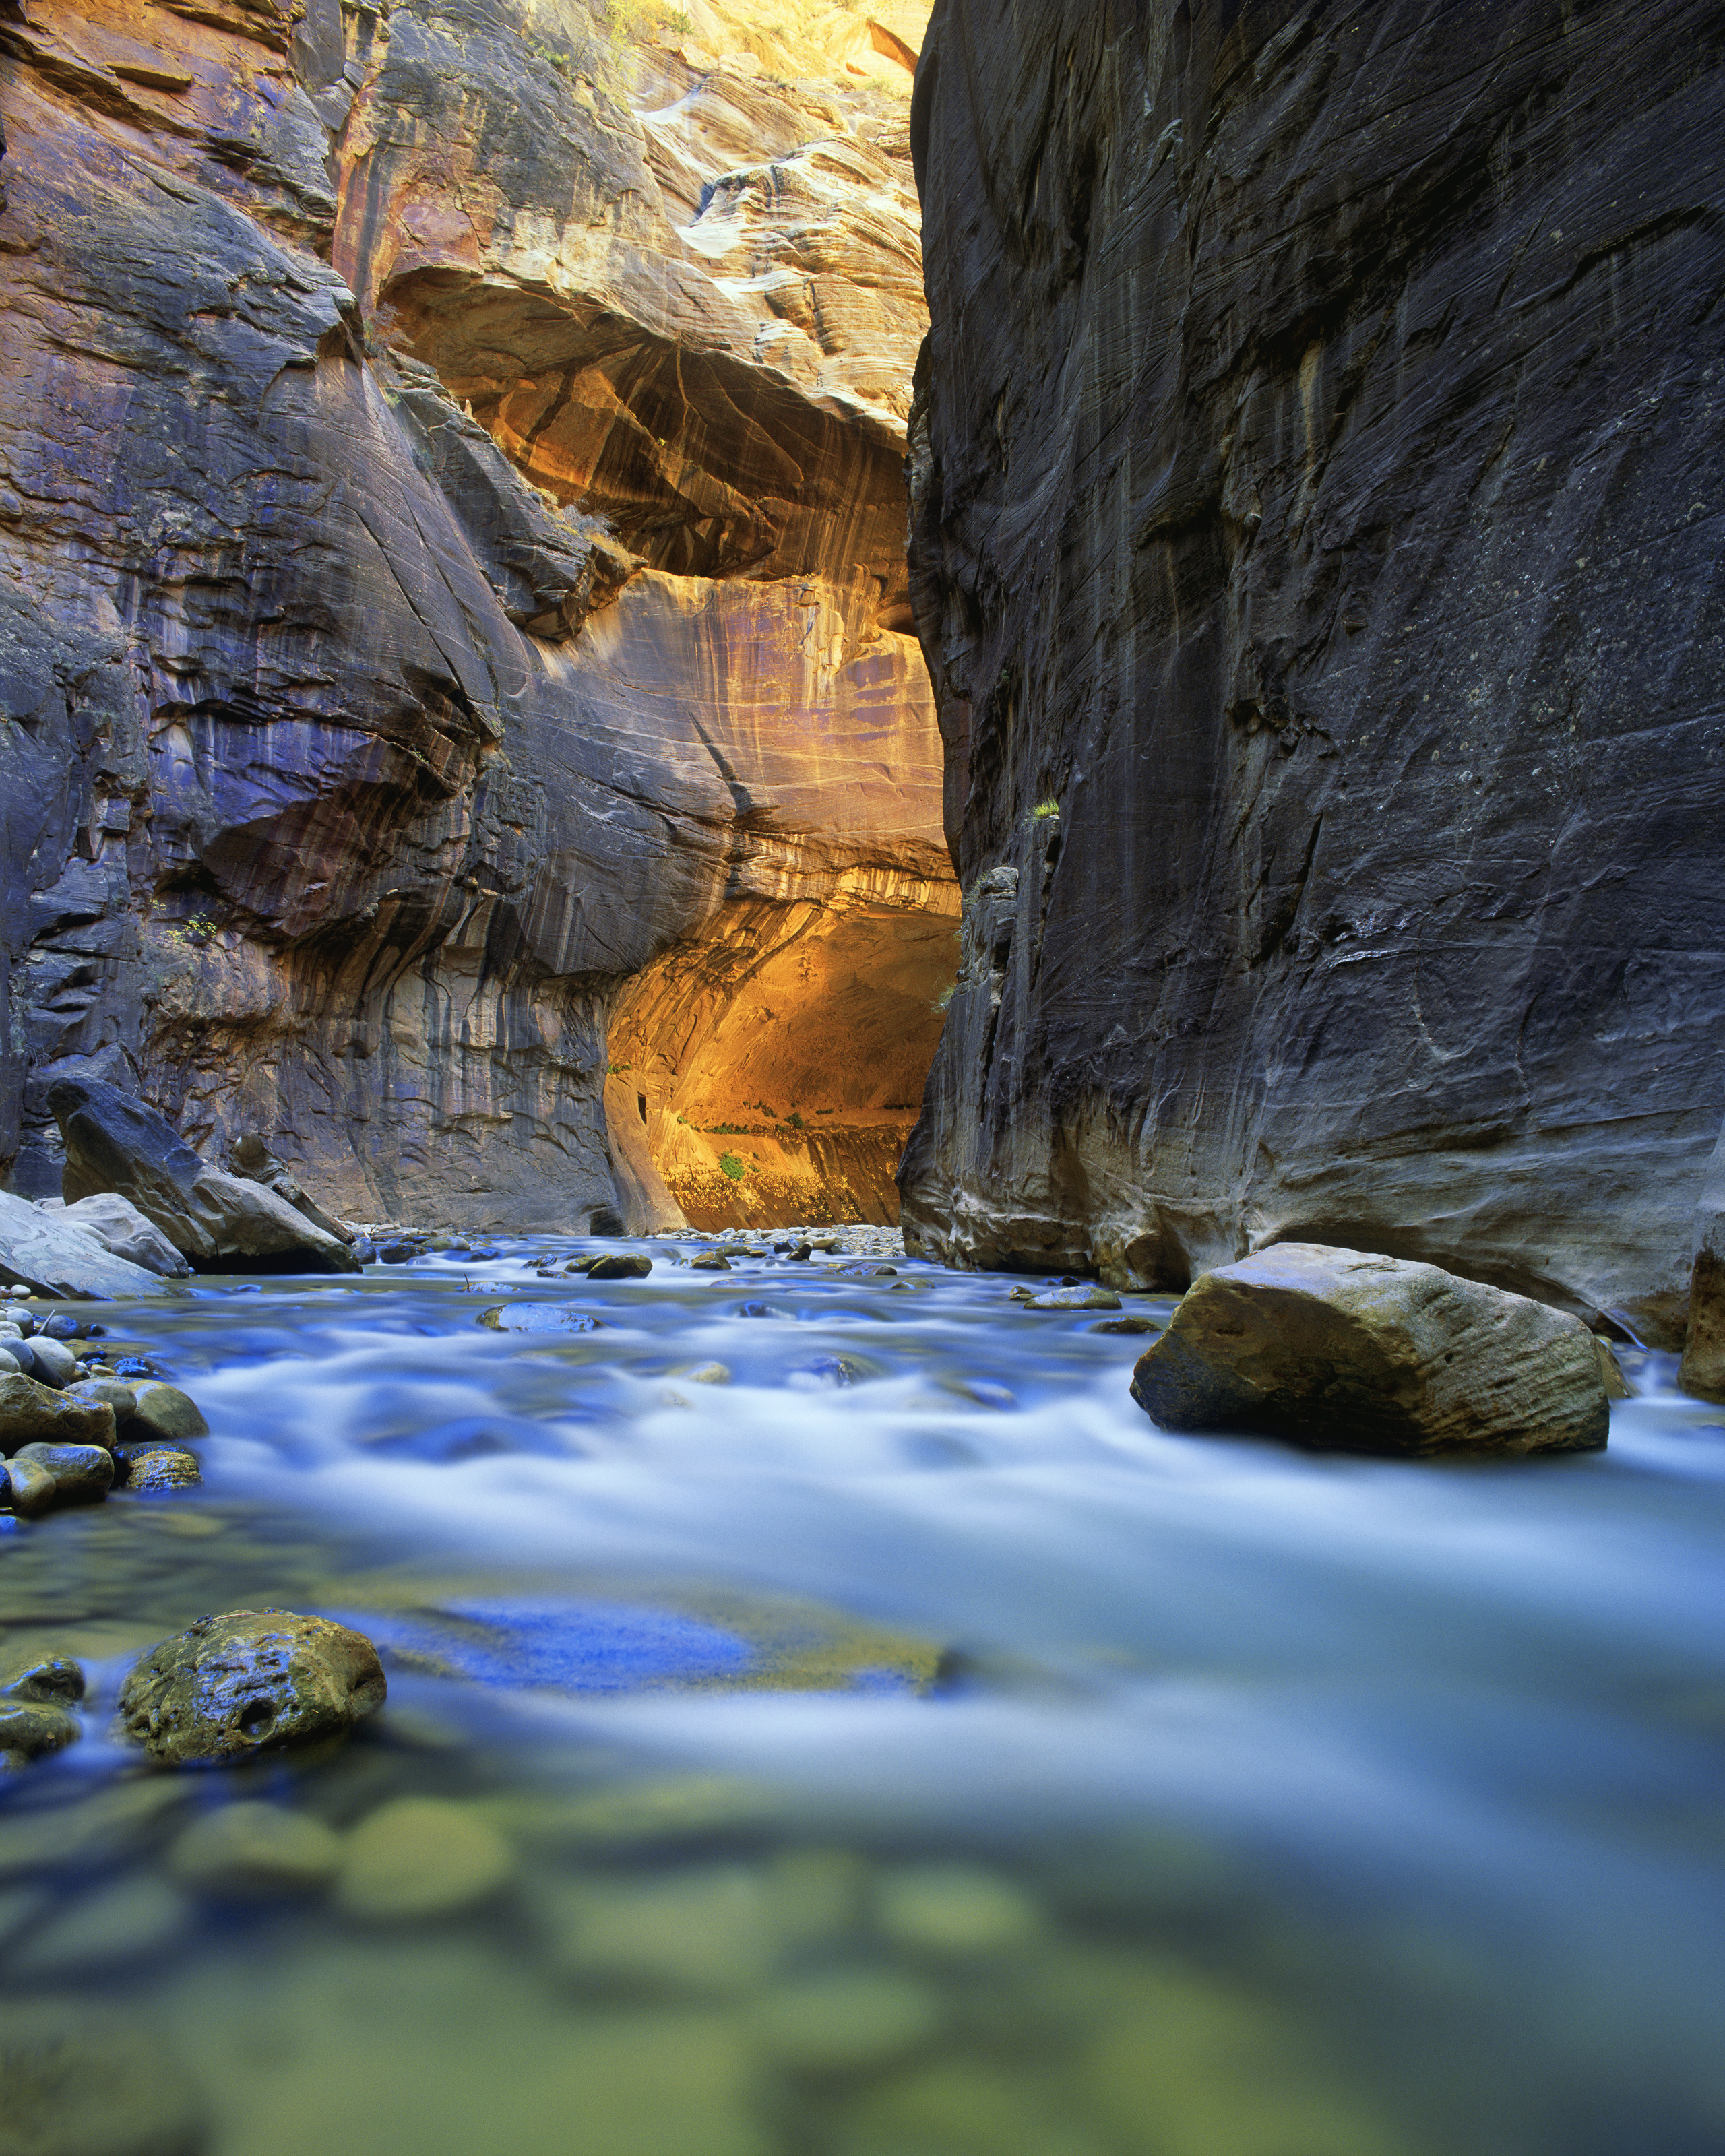 the narrows zion background